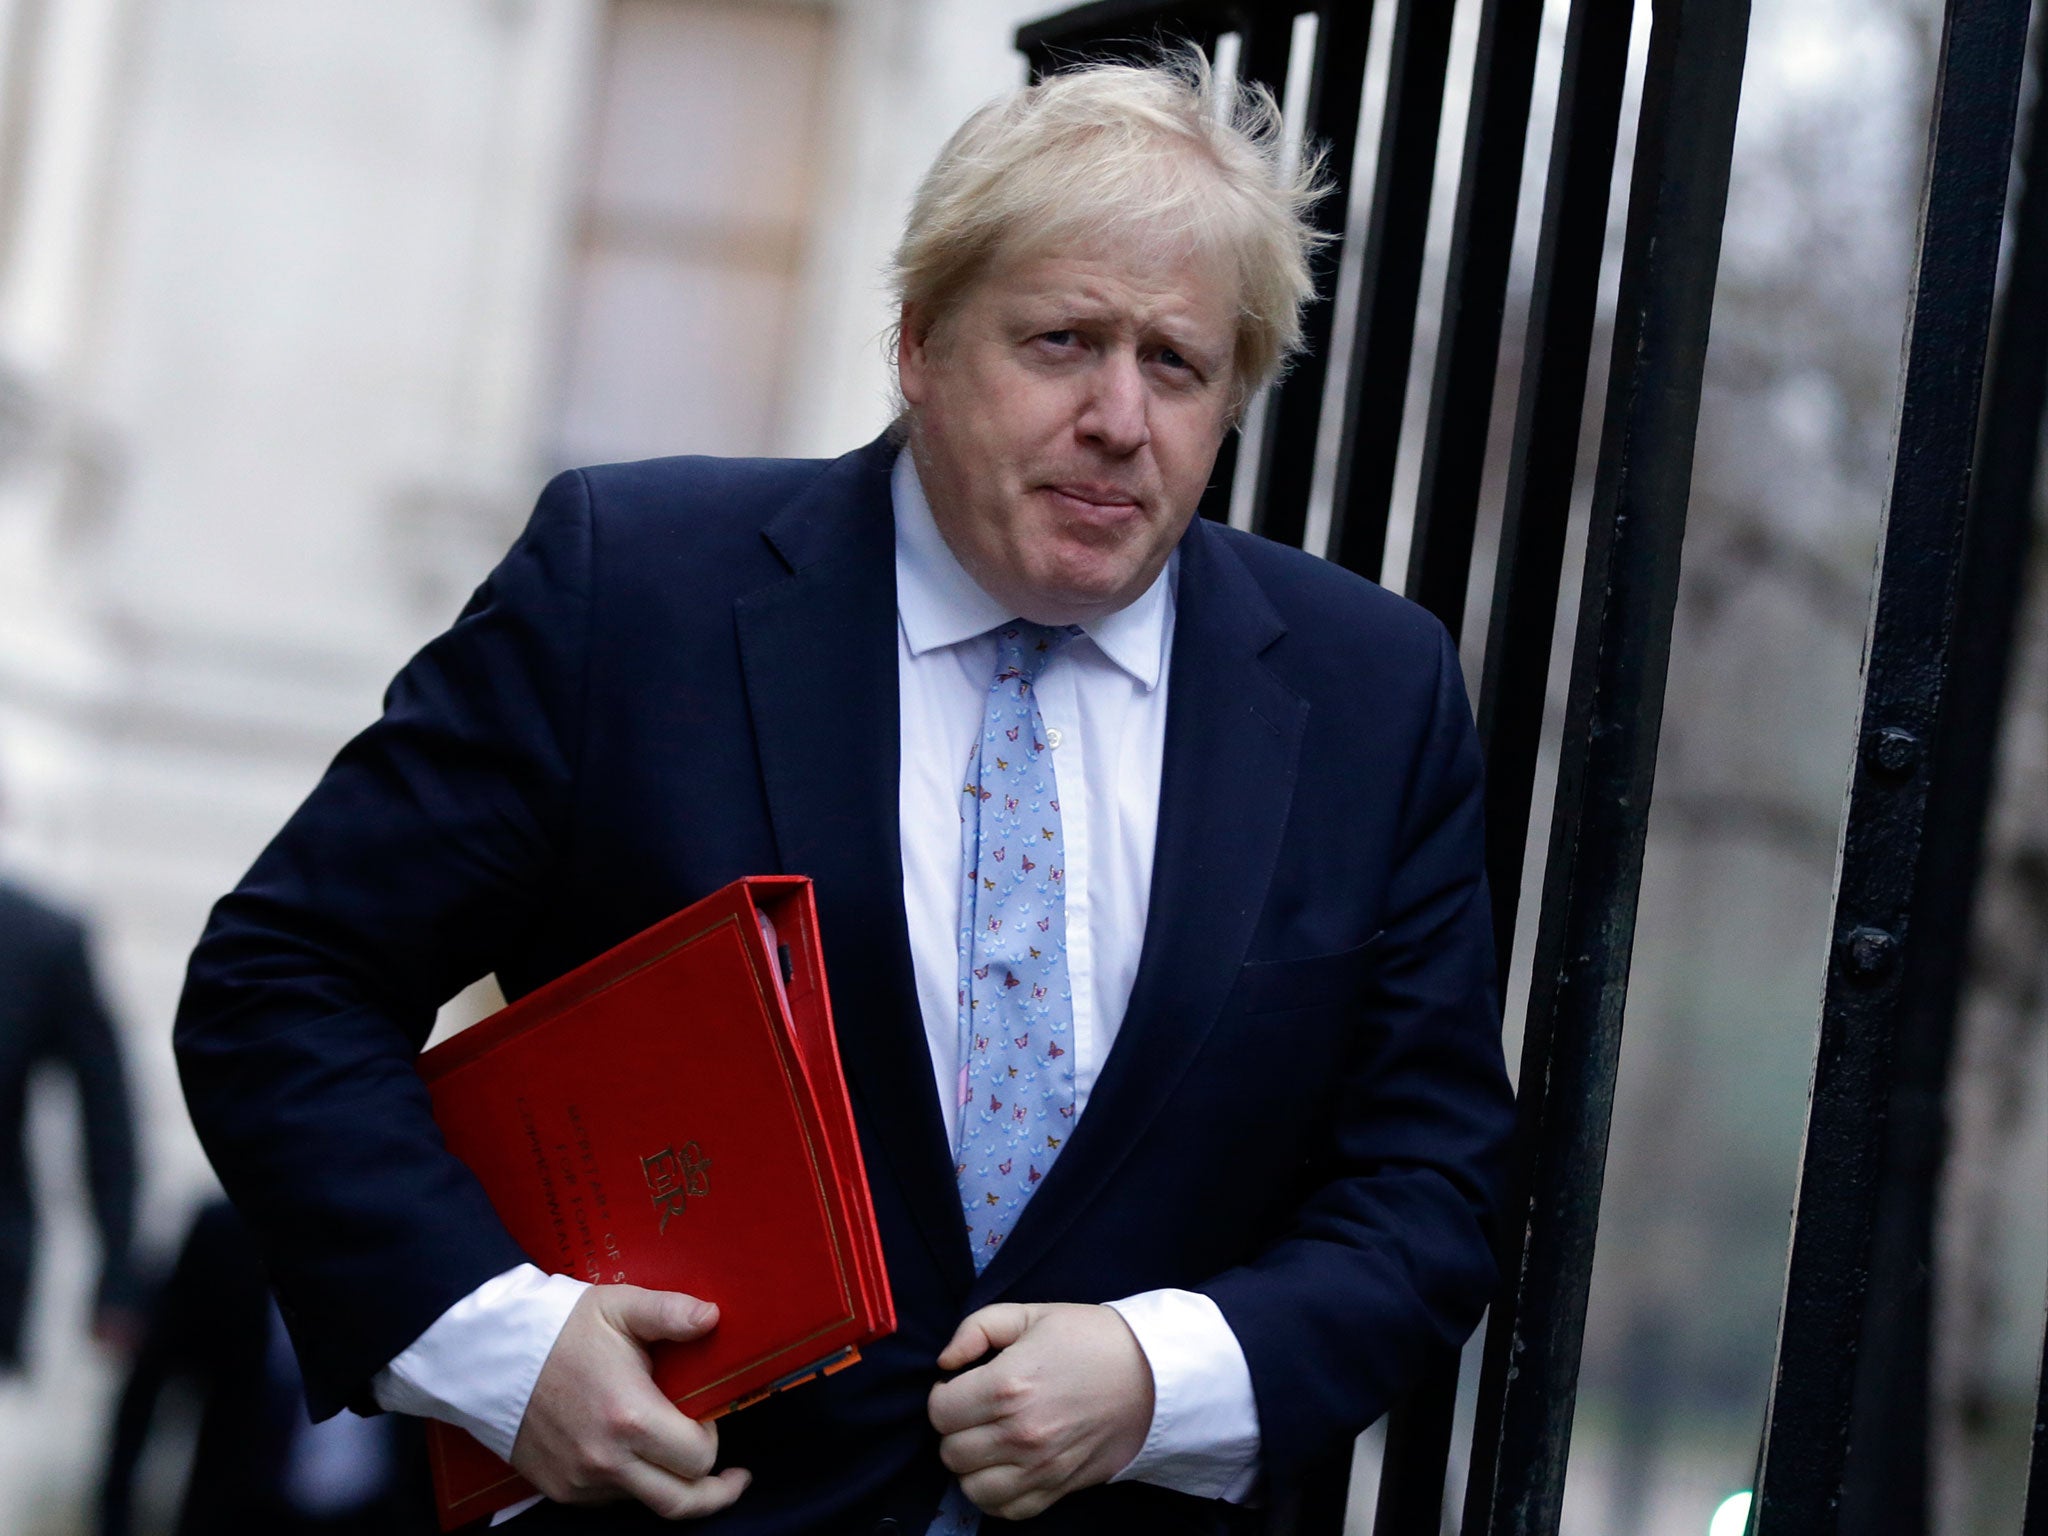 Boris Johnson has said that more than £350m a year will go to the NHS